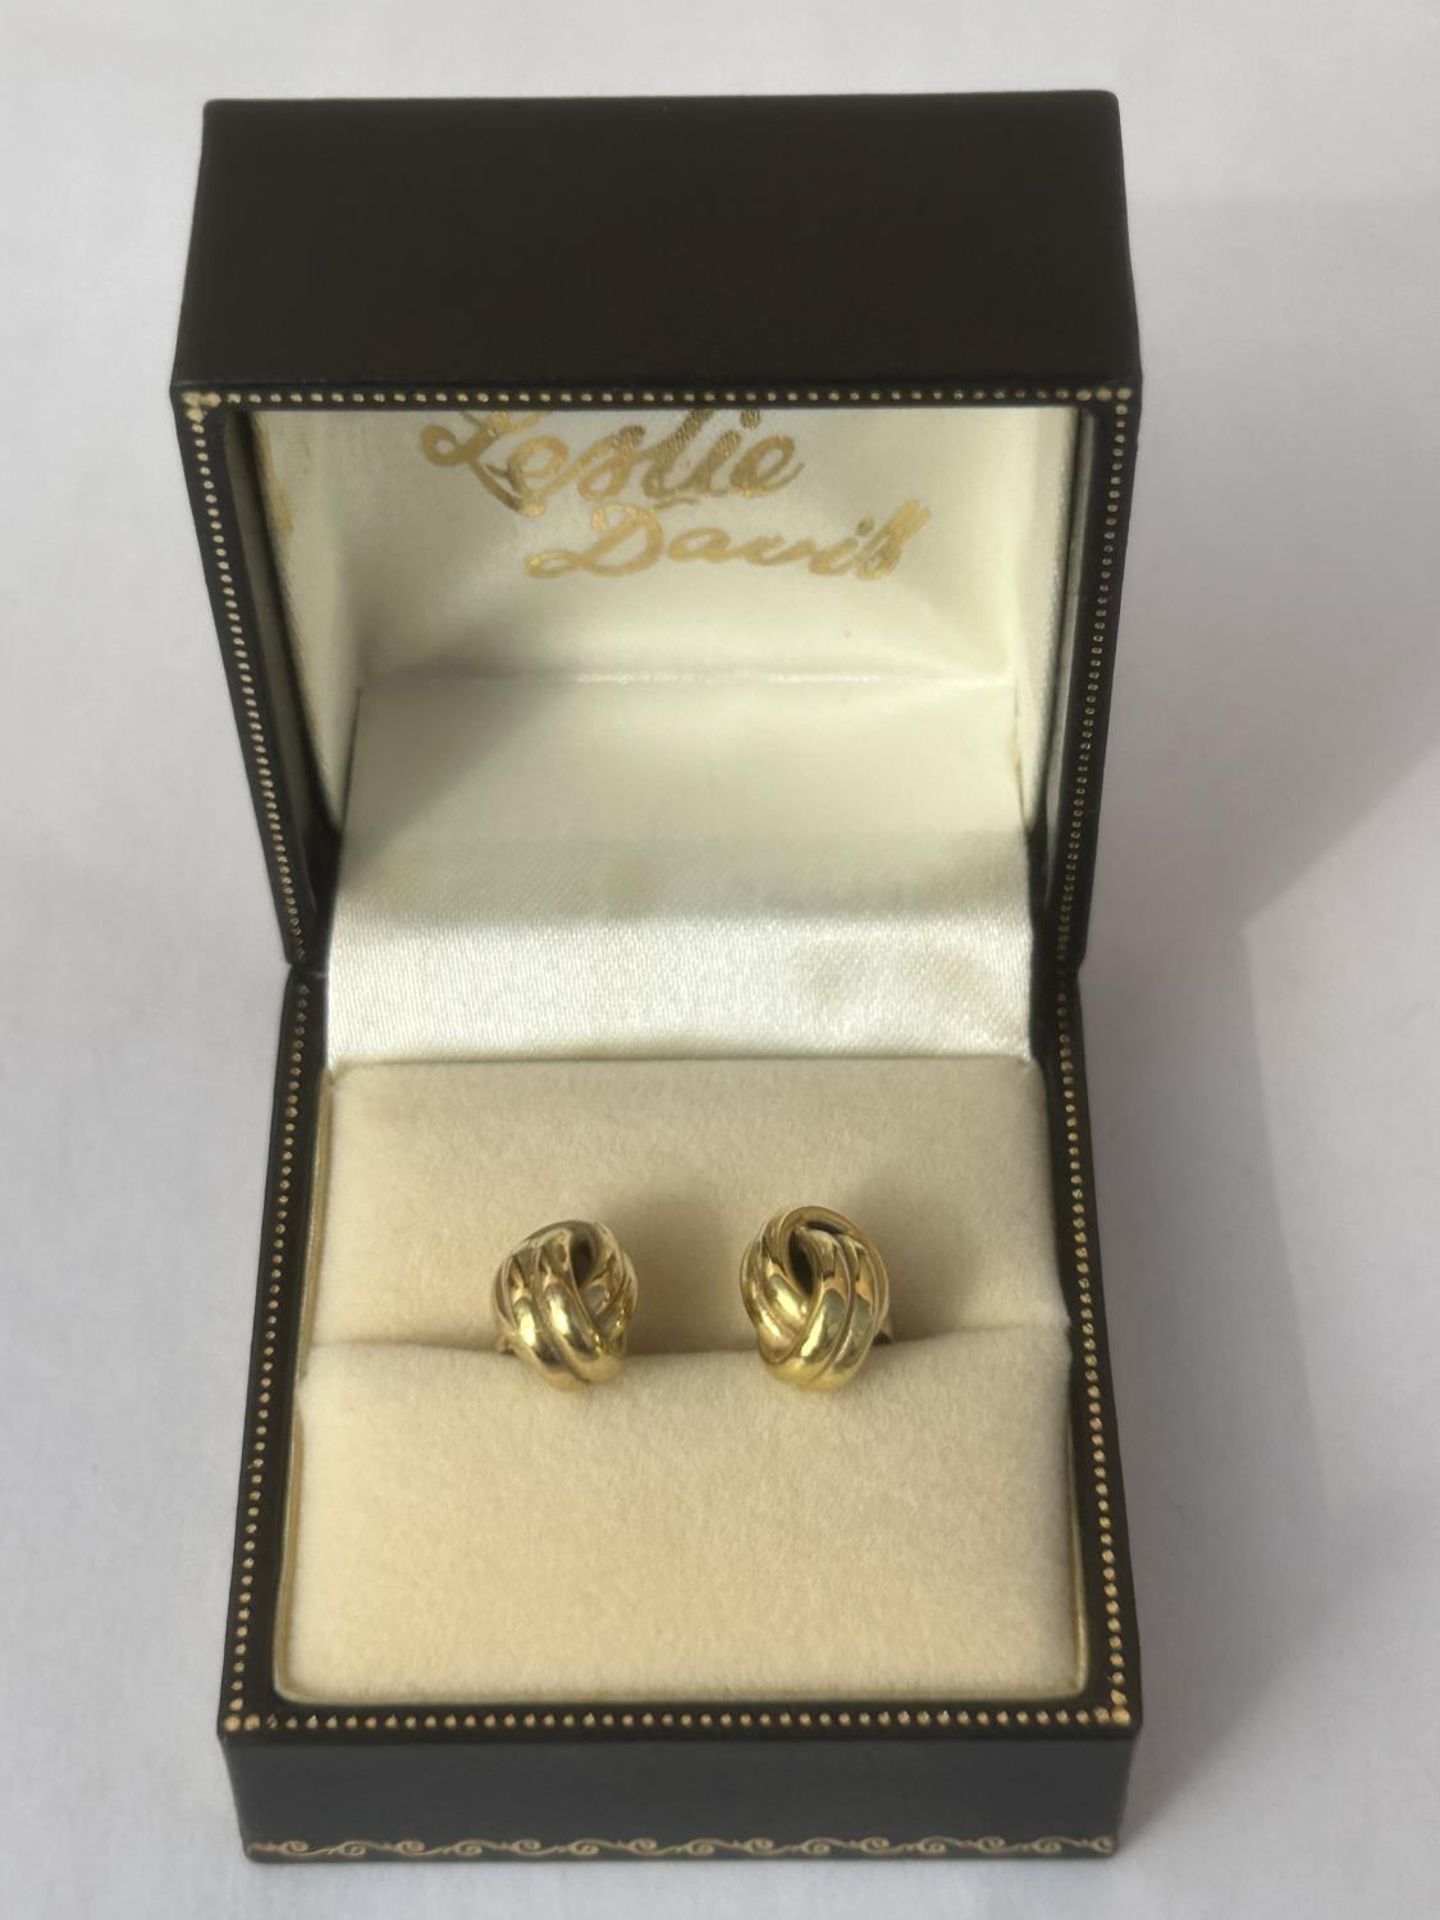 A PAIR OF 9CT GOLD DOUBLE ROW KNOT STUD EARRINGS COMPLETE WITH GOLD BUTTERFLY BACKS AND PRESENTATION